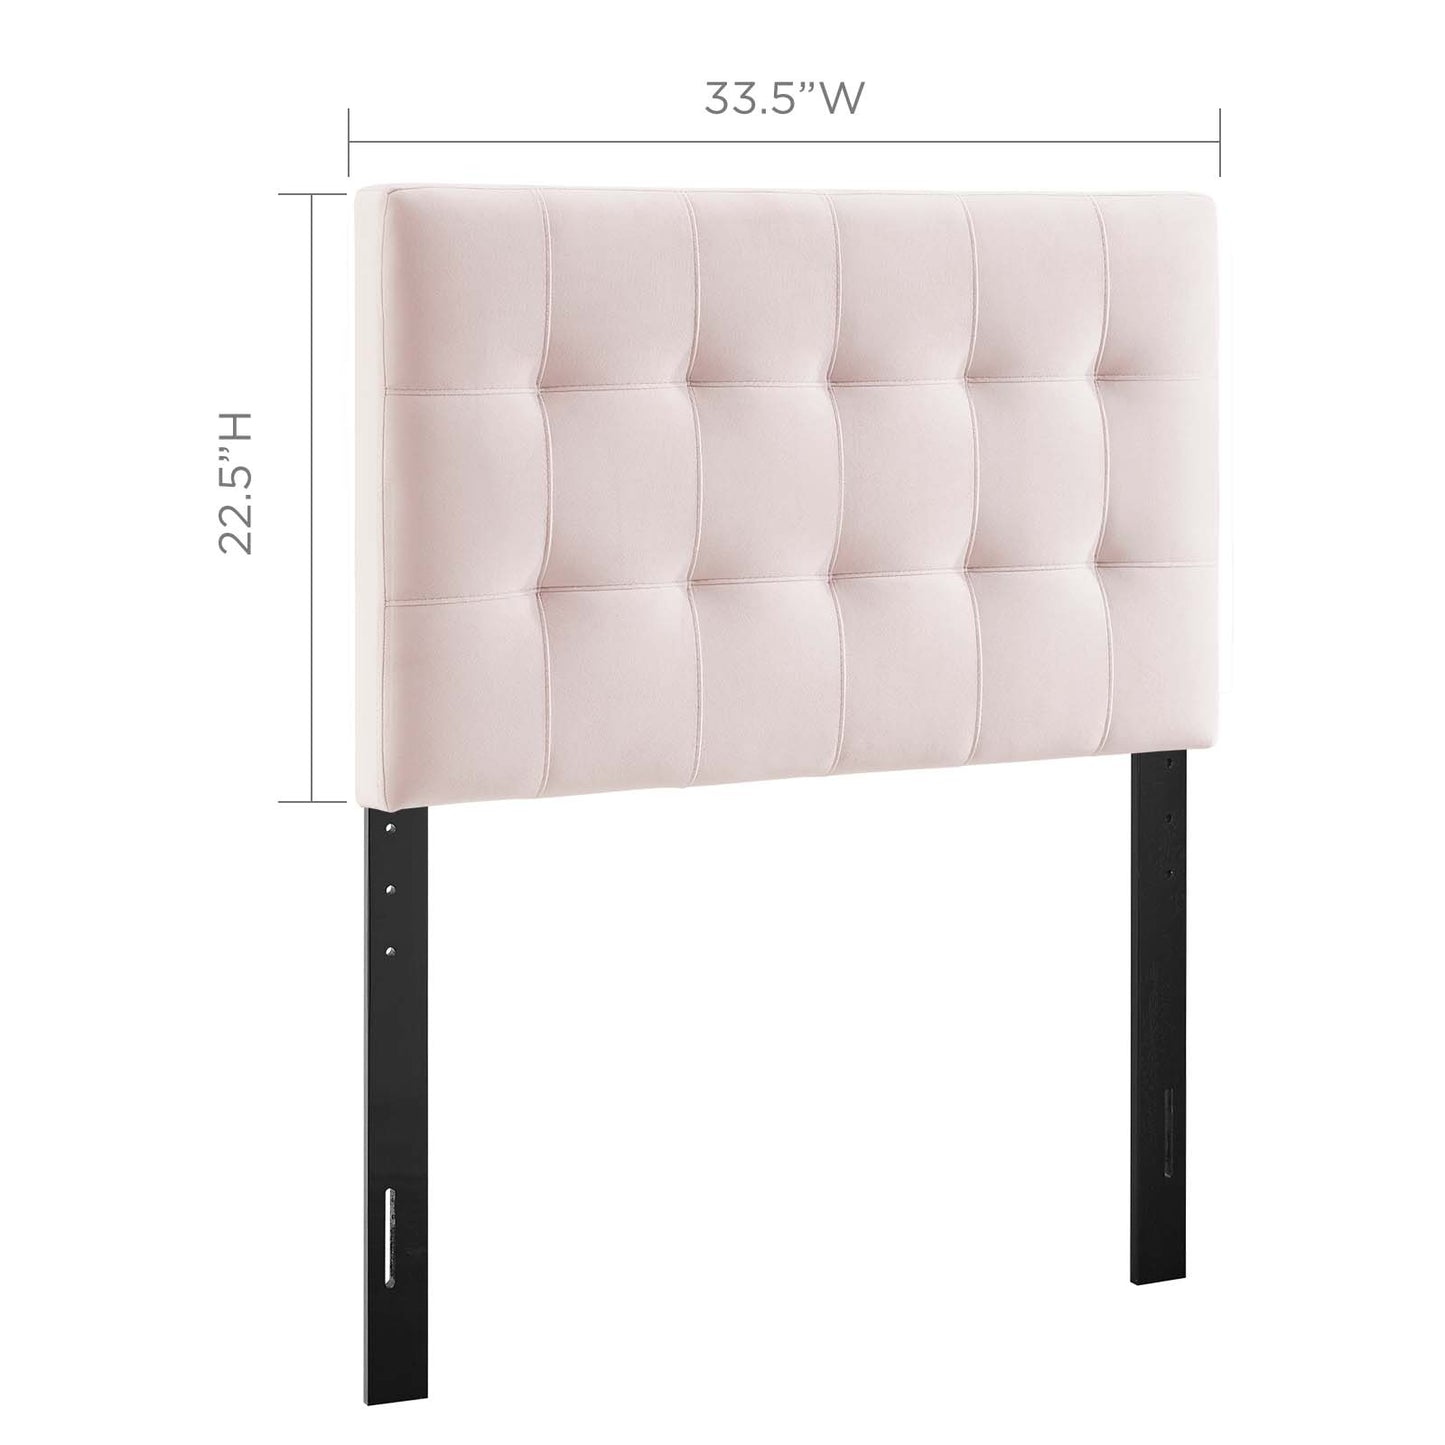 Lily Biscuit Tufted Twin Performance Velvet Headboard Pink MOD-6118-PNK